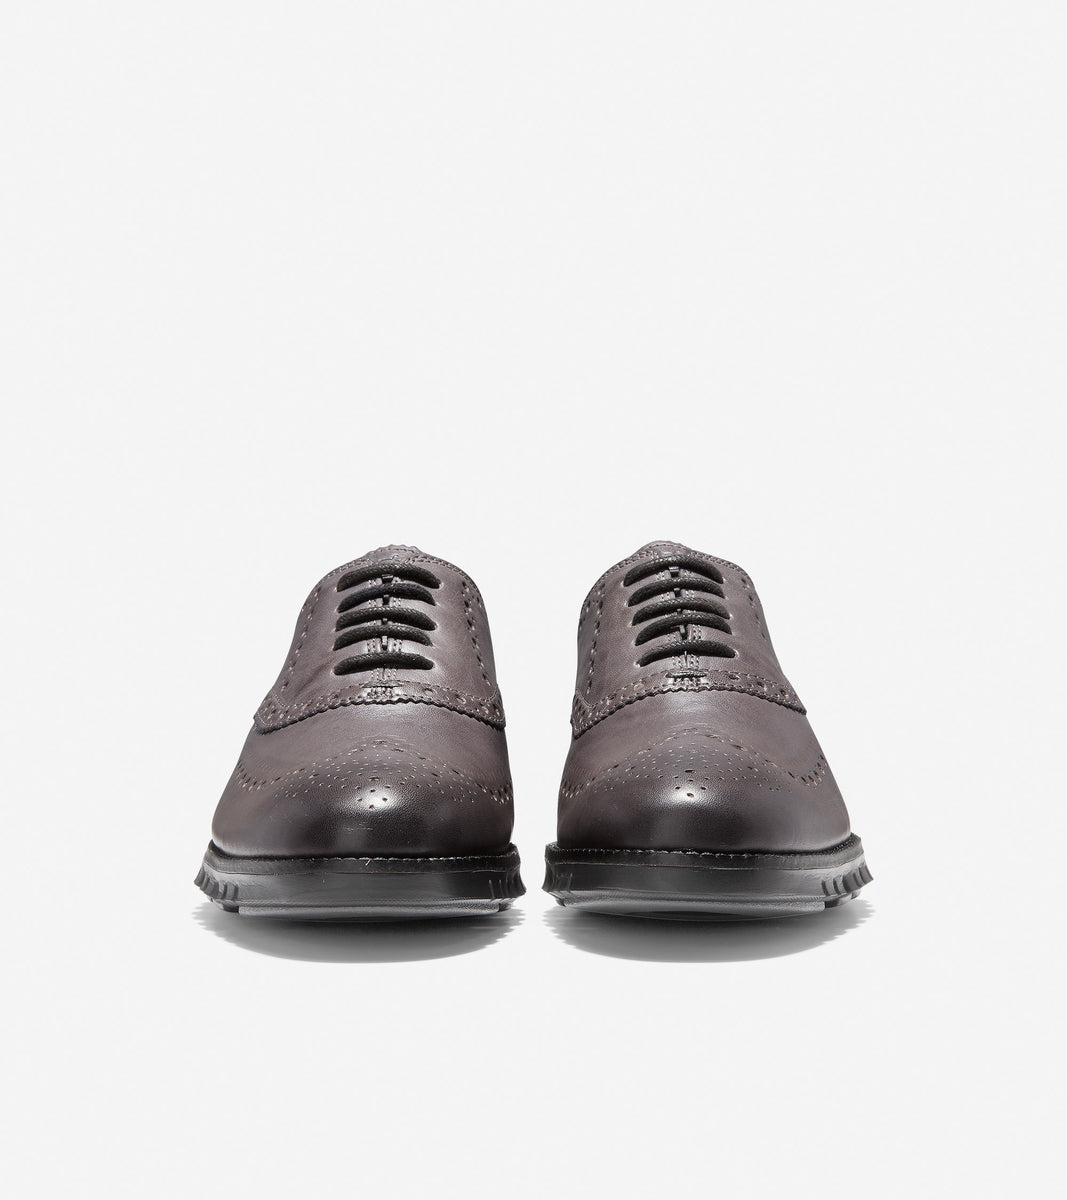 ColeHaan-ZERØGRAND Wingtip Oxford-c30720-Burnished Pavement Leather